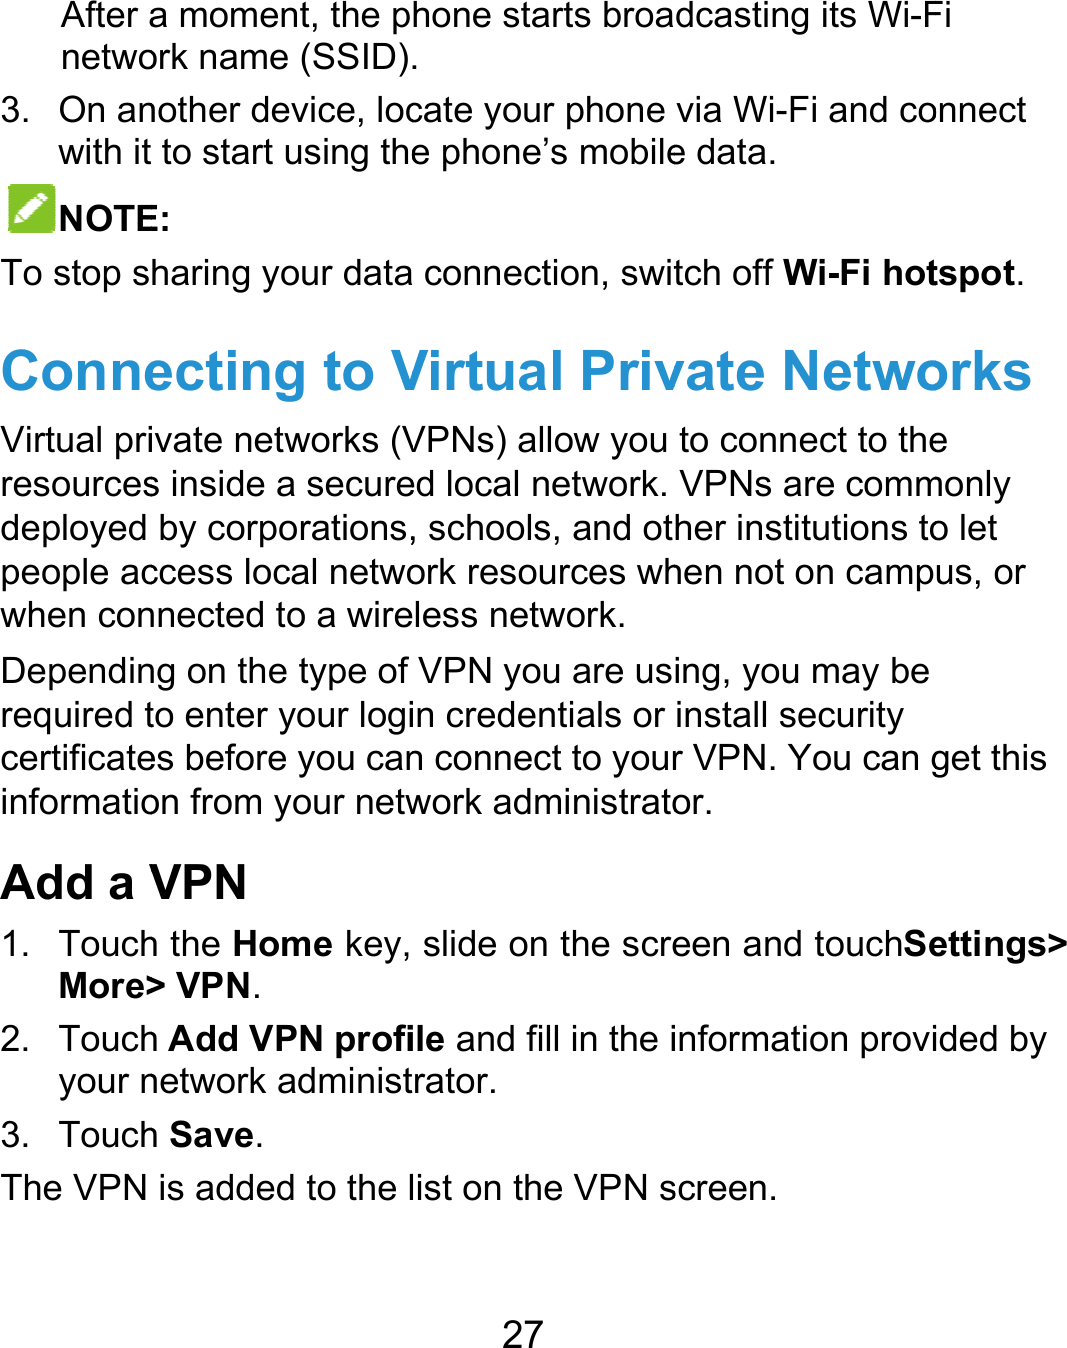  After anetwo3. On anwith itNOTETo stop sConneVirtual priresourcesdeployed people acwhen conDependinrequired tcertificateinformatioAdd a V1. TouchMore&gt;2. Touchyour n3. TouchThe VPN  a moment, the pork name (SSID)nother device, loc to start using theE: haring your dataecting to Vivate networks (Vs inside a secureby corporations,ccess local netwonnected to a wireng on the type of to enter your logies before you canon from your netwVPN h the Home key, &gt; VPN. h Add VPN profinetwork administh Save. is added to the l27 hone starts broa. cate your phone e phone’s mobile connection, switVirtual PrivVPNs) allow you ed local network. , schools, and otork resources whless network. VPN you are usin credentials or n connect to yourwork administratoslide on the screile and fill in the irator. list on the VPN sdcasting its Wi-Fvia Wi-Fi and coe data. tch off Wi-Fi hotvate Netwoto connect to theVPNs are commher institutions tohen not on camping, you may be install security r VPN. You can gor. een and touchSeinformation proviscreen. Fi onnect tspot. orks e monly o let us, or get this ettings&gt; ided by 